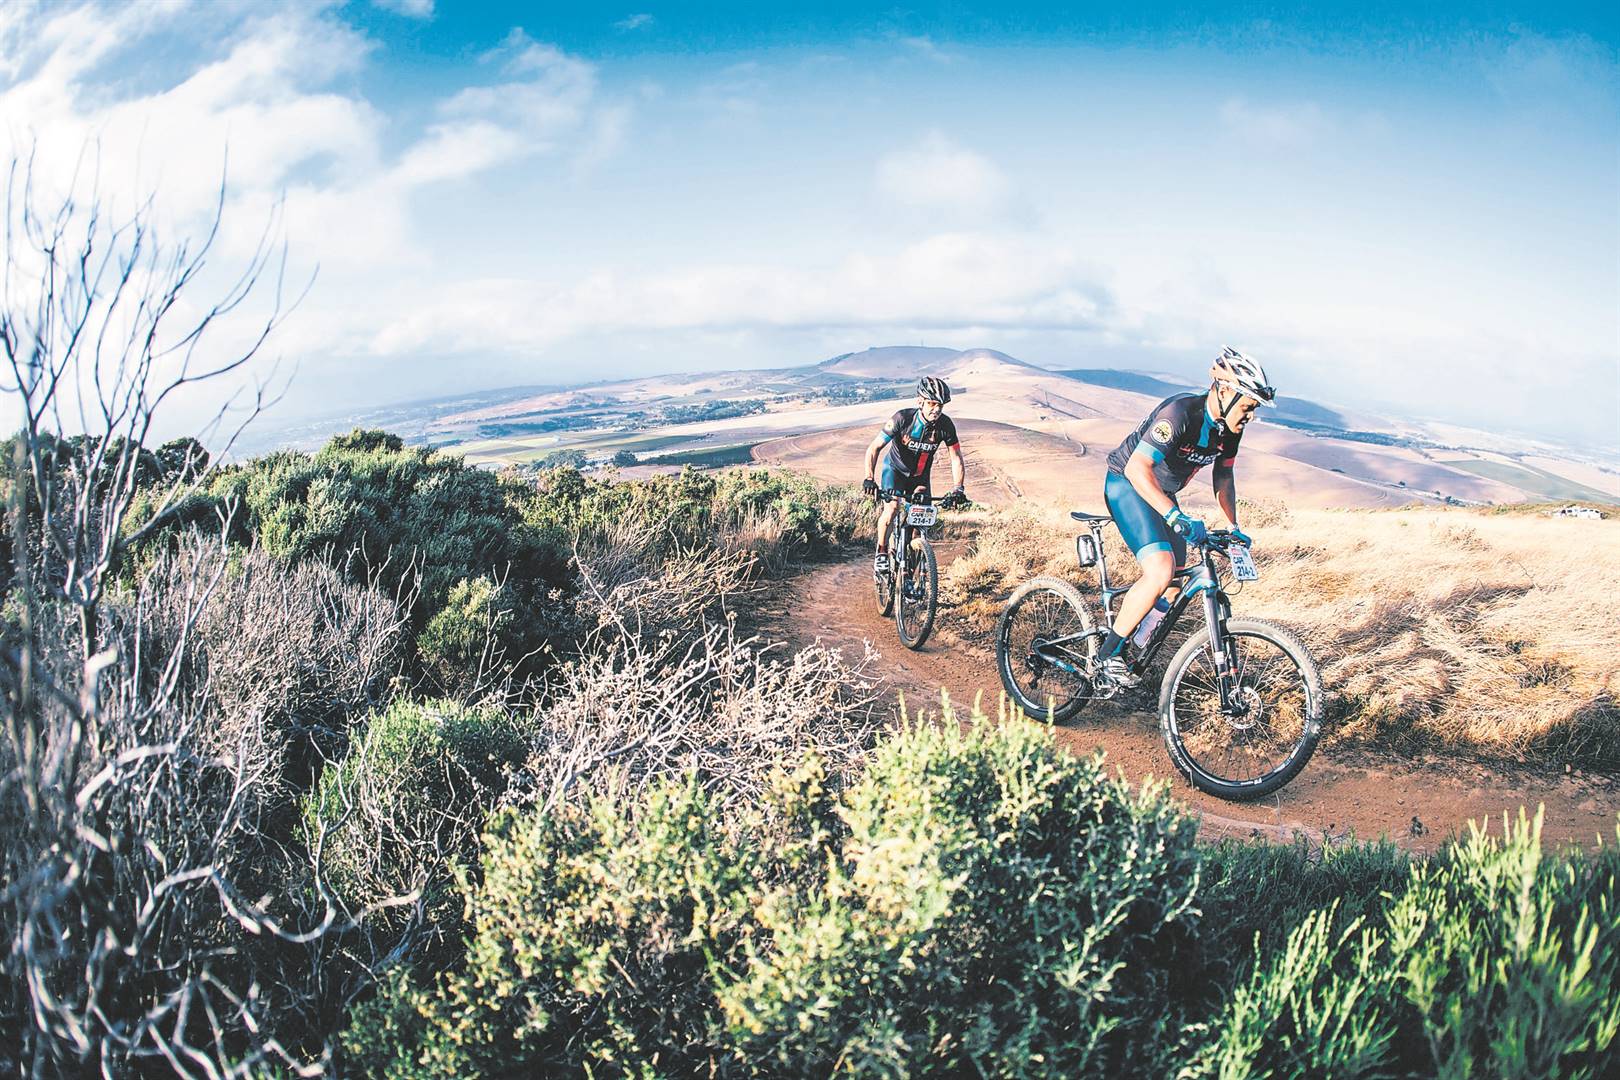 The gruelling 20th Cape Epic will soon be taking place in the Boland mountains again, with lots of action to be seen in and around Wellington.